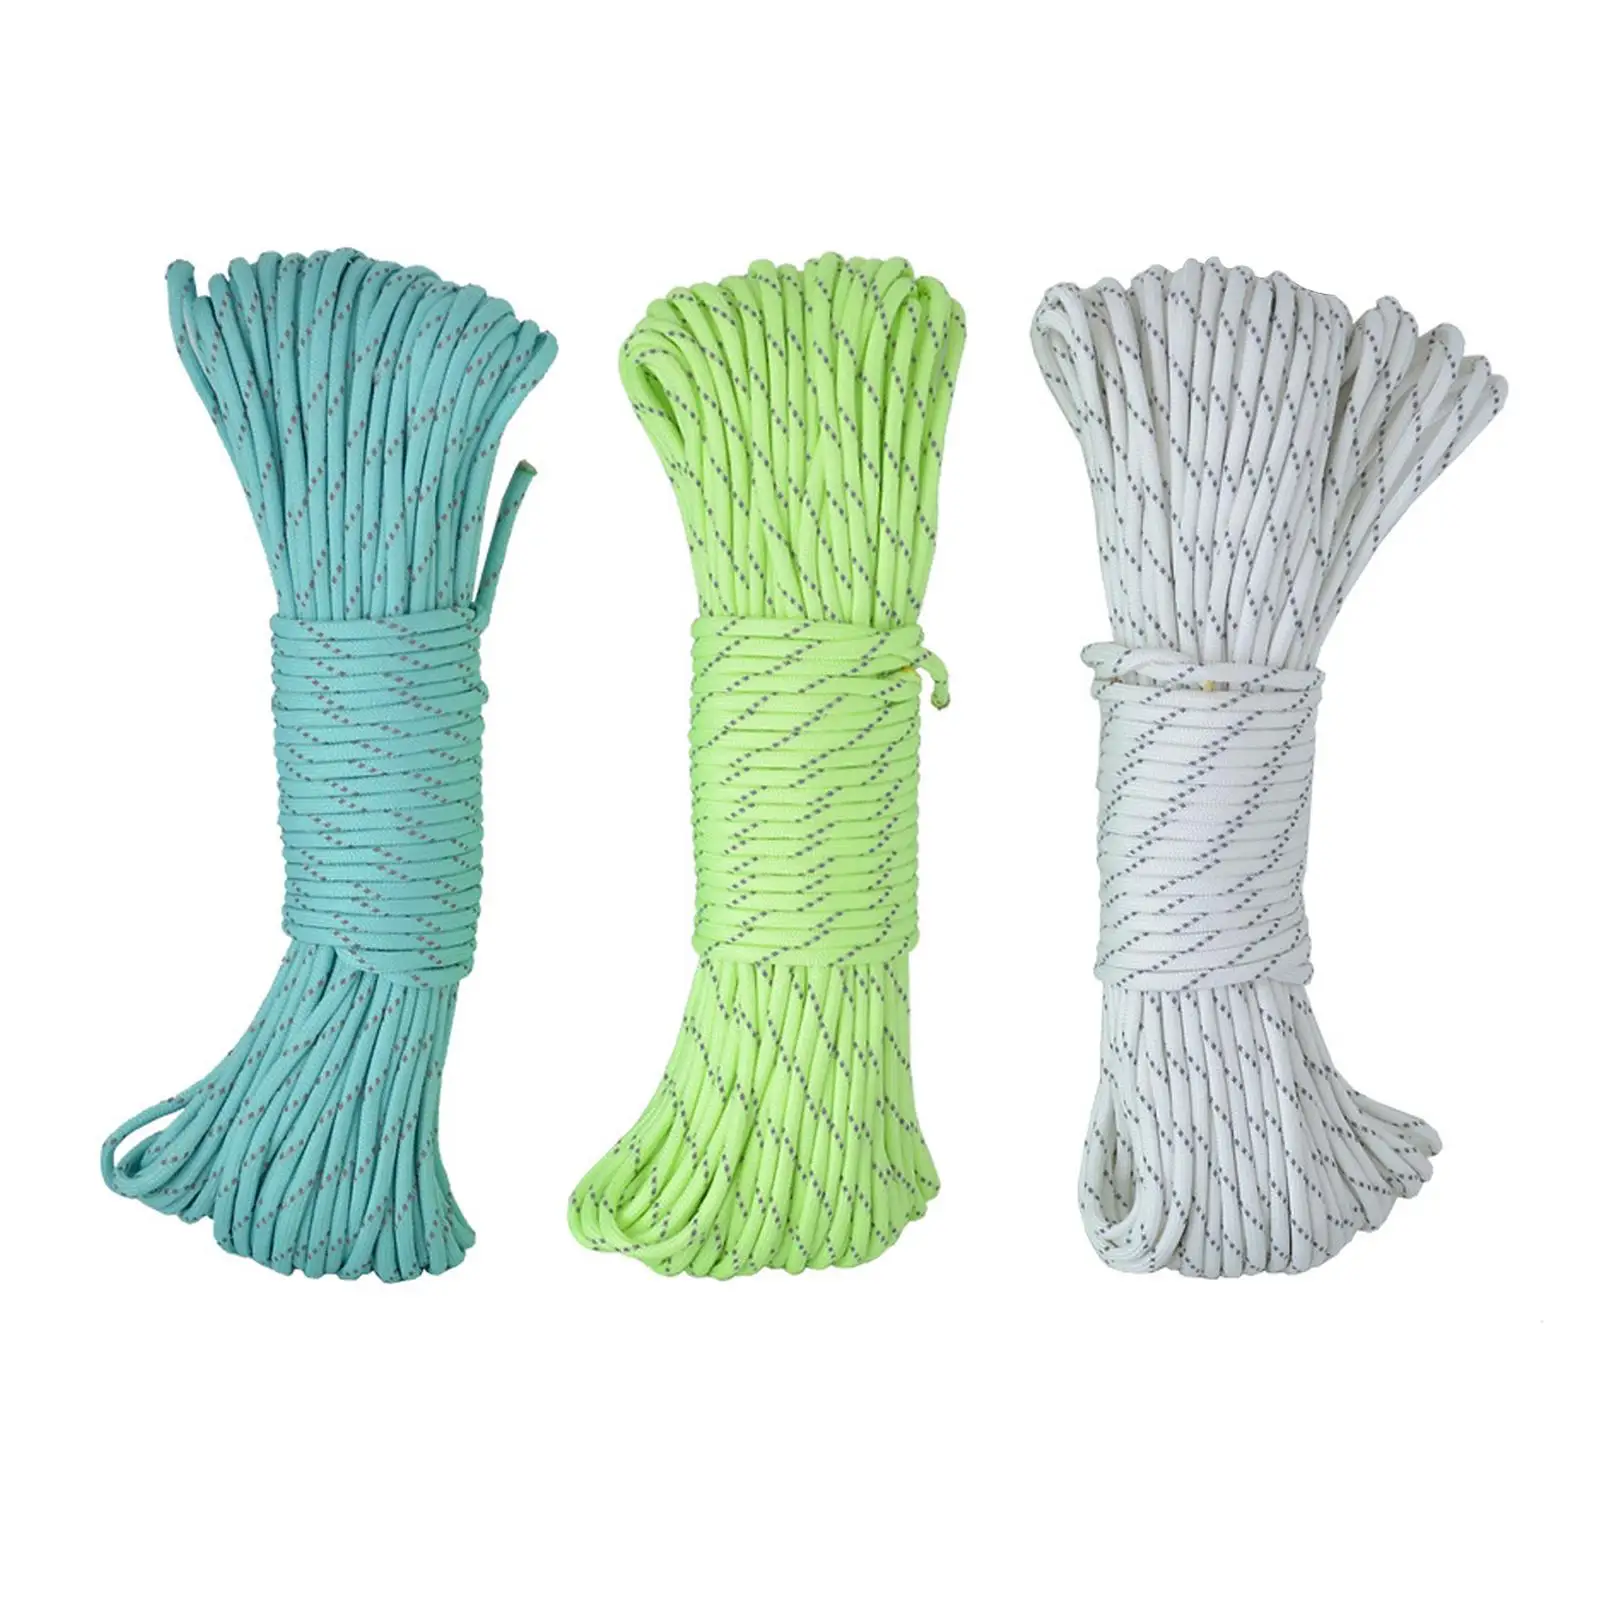 Outdoor Luminous Rope 101 ft Camping Rope Paracord Parachute Cord Binding Pull Rope for Bracelet Braiding Tent Camping Hiking